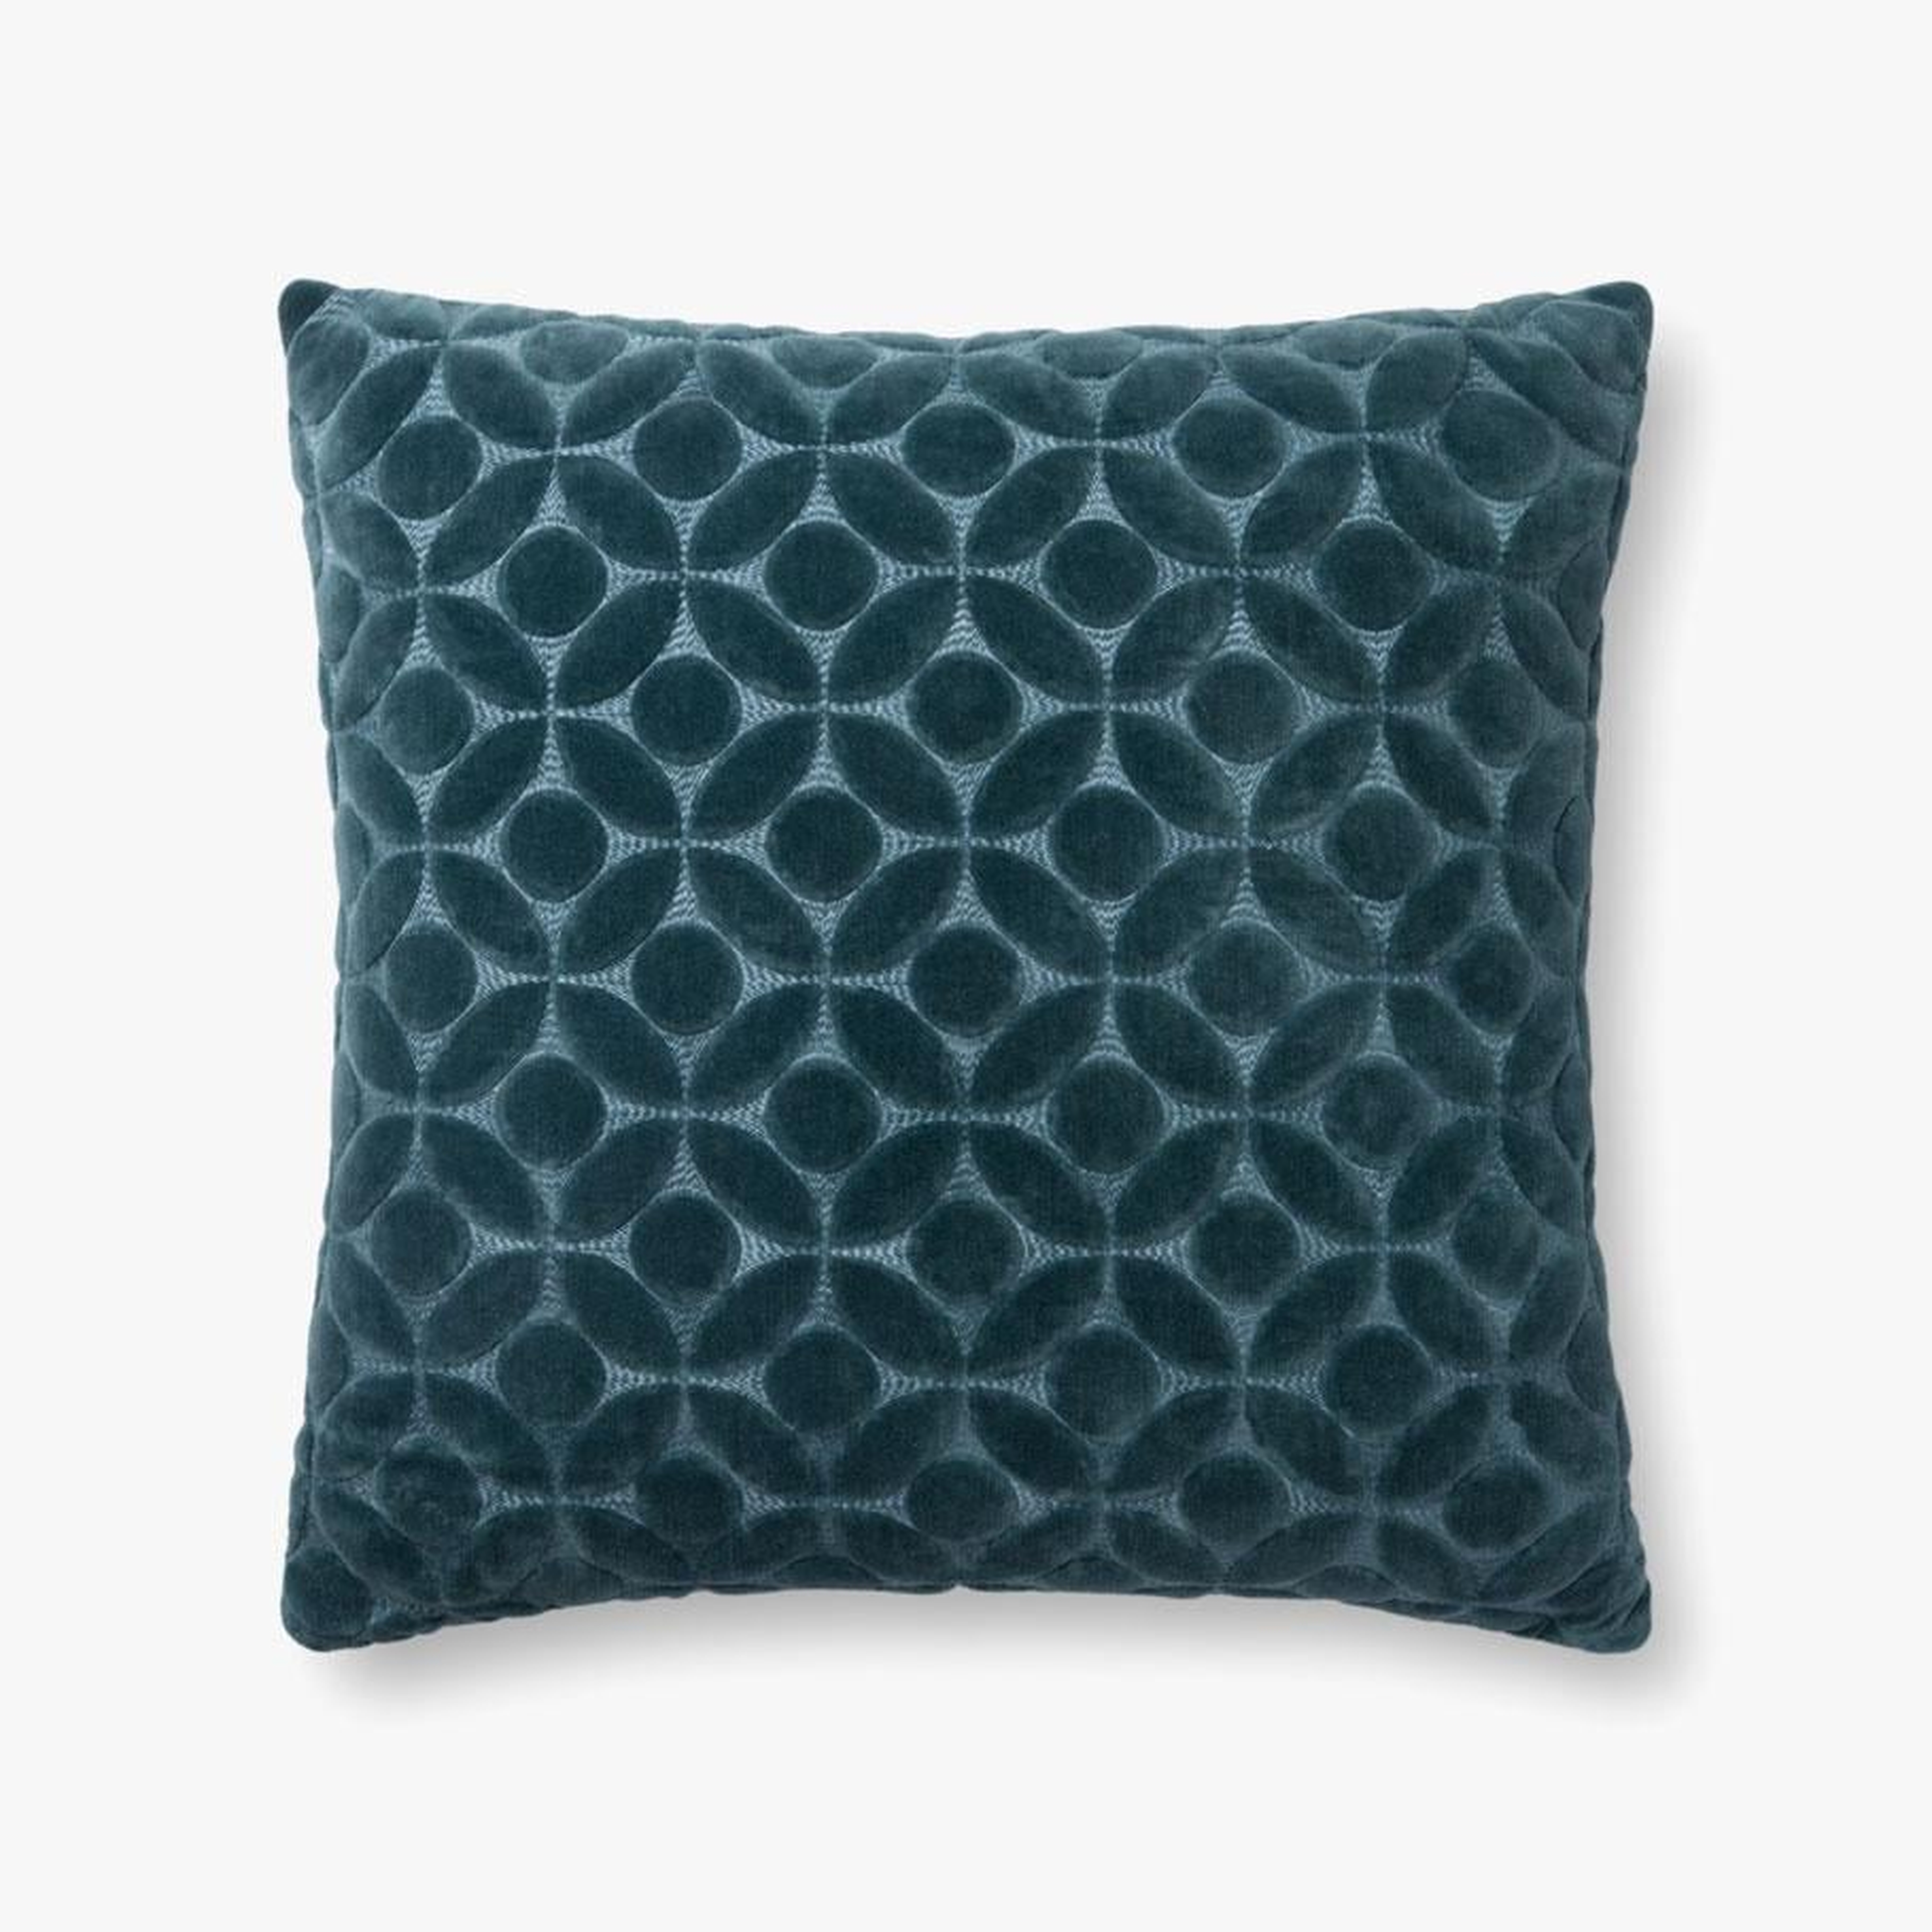 Loloi PILLOWS P0864 Teal 22" x 22" Cover w/Poly - Loloi Rugs